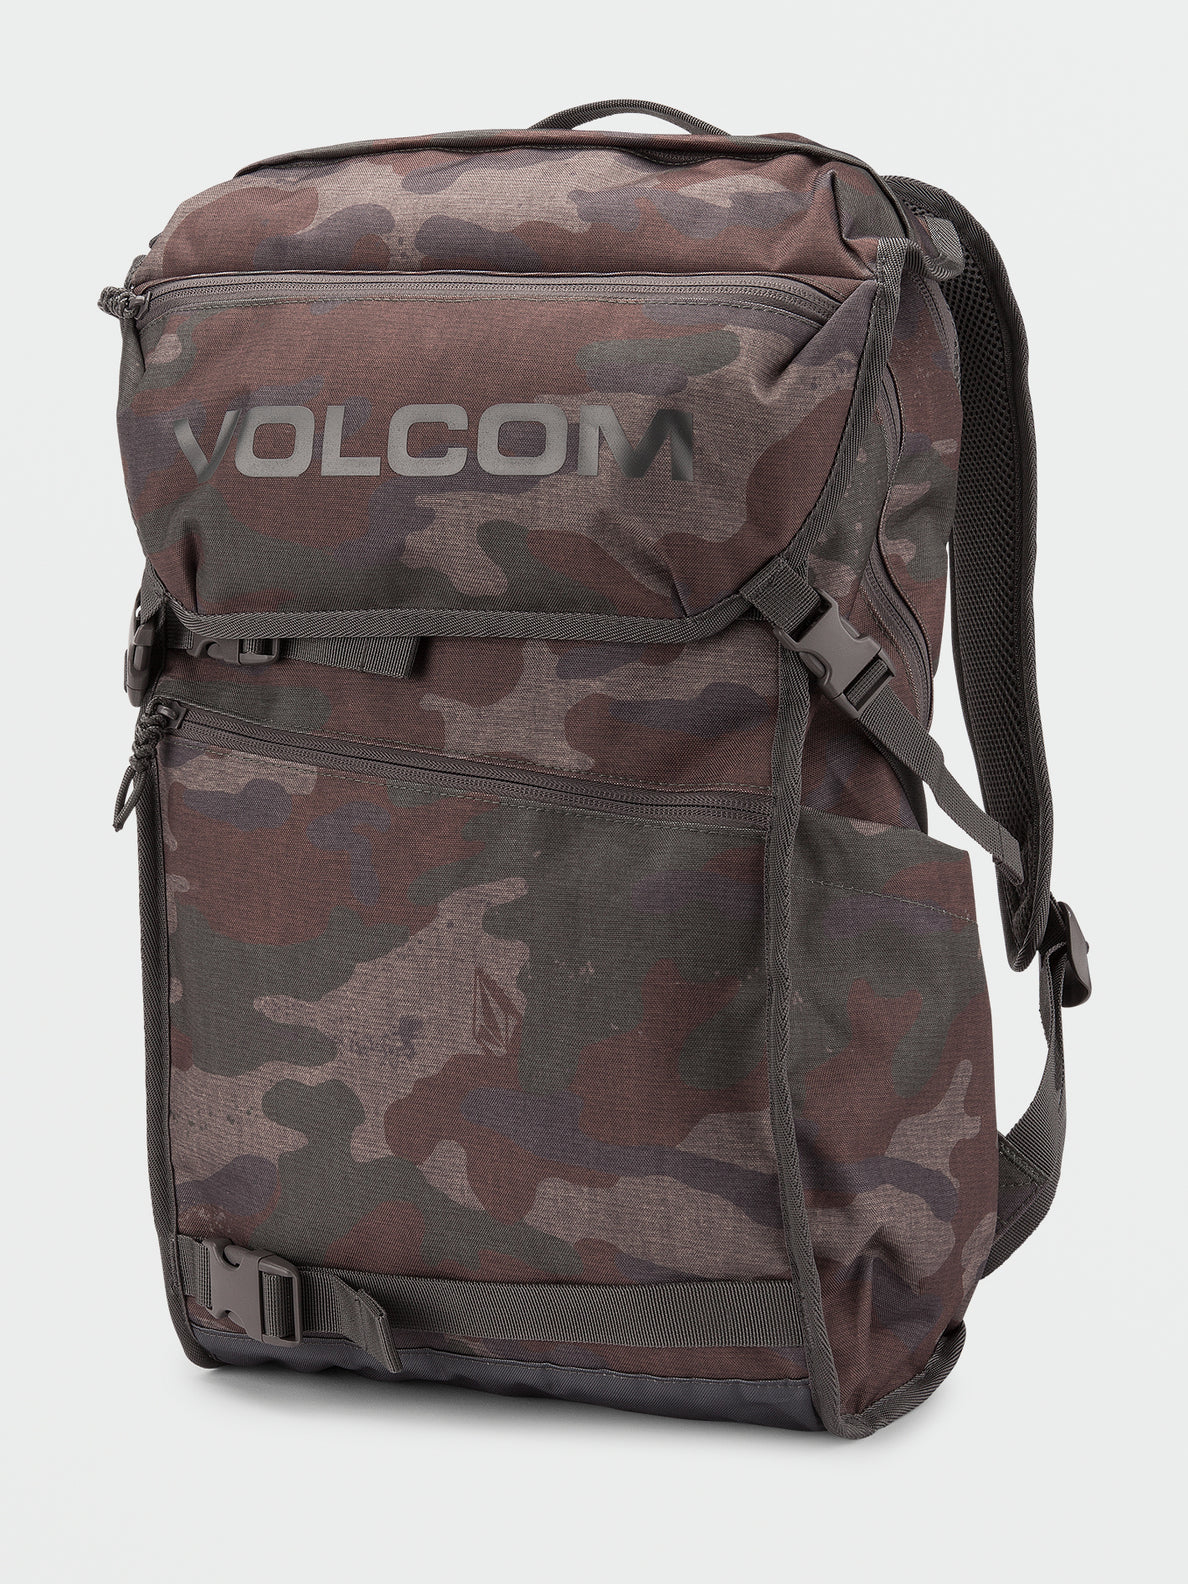 VOLCOM SUBSTRATE BACKPACK - ARMY GREEN COMBO (D6522206_ARC) [F]